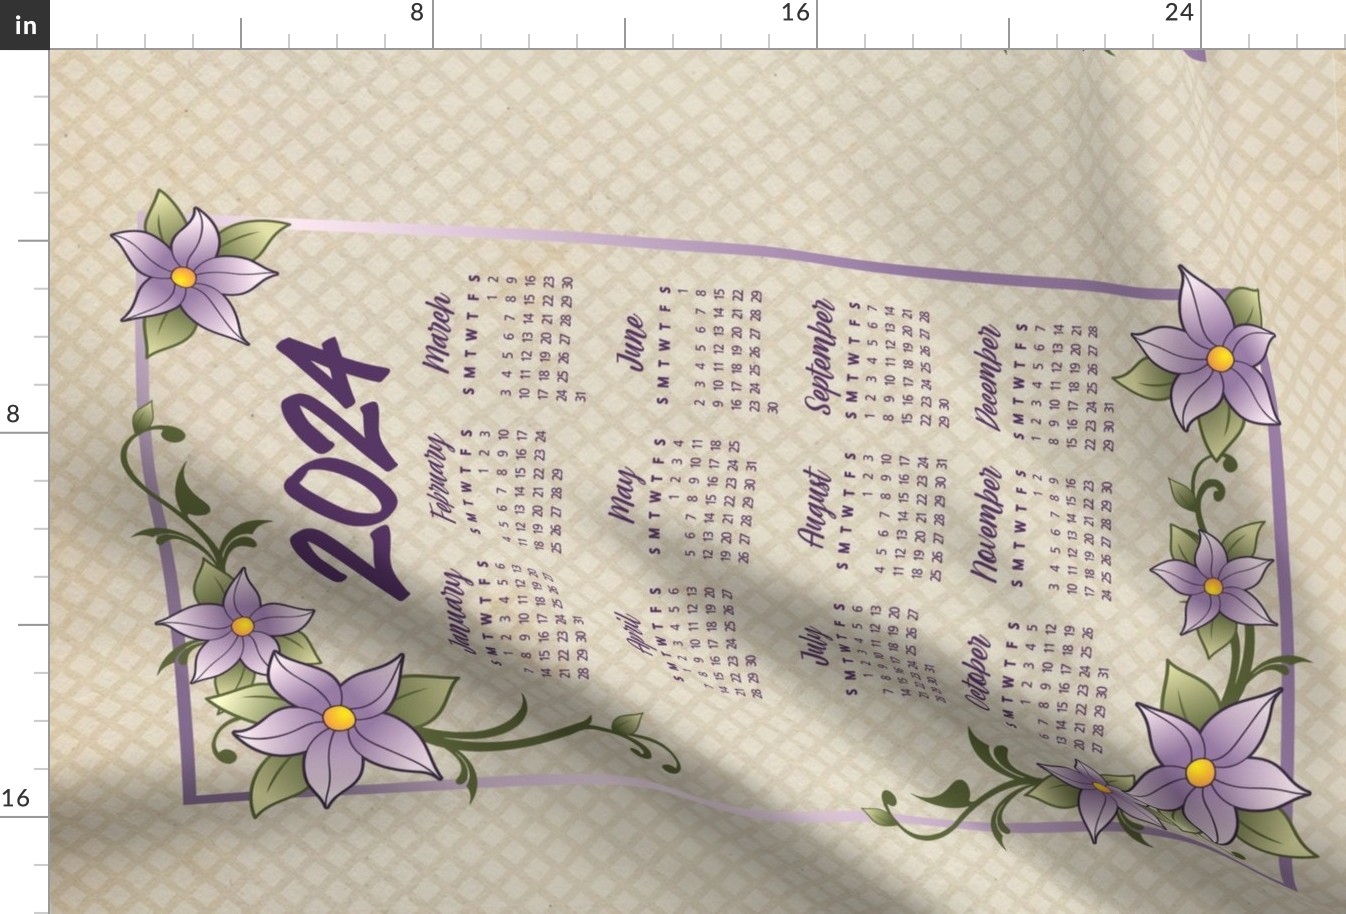 2024 Calendar Lavender Floral SUNDAY START ©Julee Wood - TO PRINT CORRECTLY choose FAT QUARTER in any fabric 54" or wider